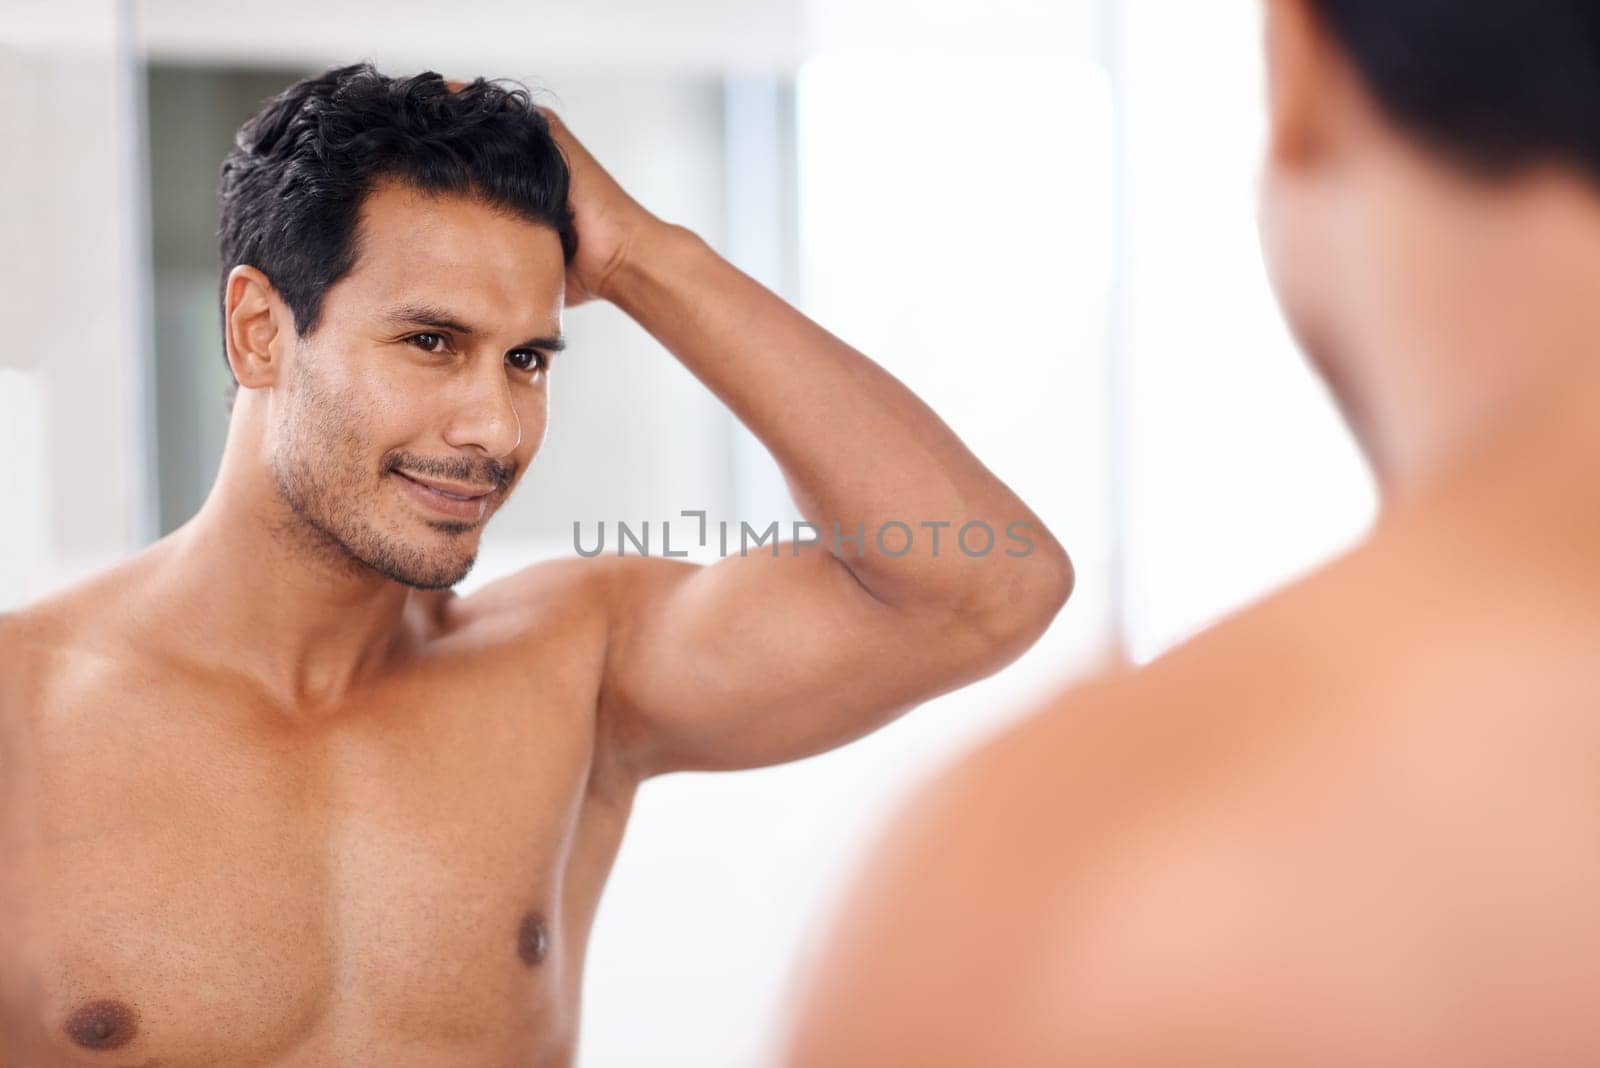 Body, bathroom mirror and happy man with hair check in house for skincare, wellness or morning routine. Hairline, reflection and male person with growth, texture or satisfaction after shower at home.